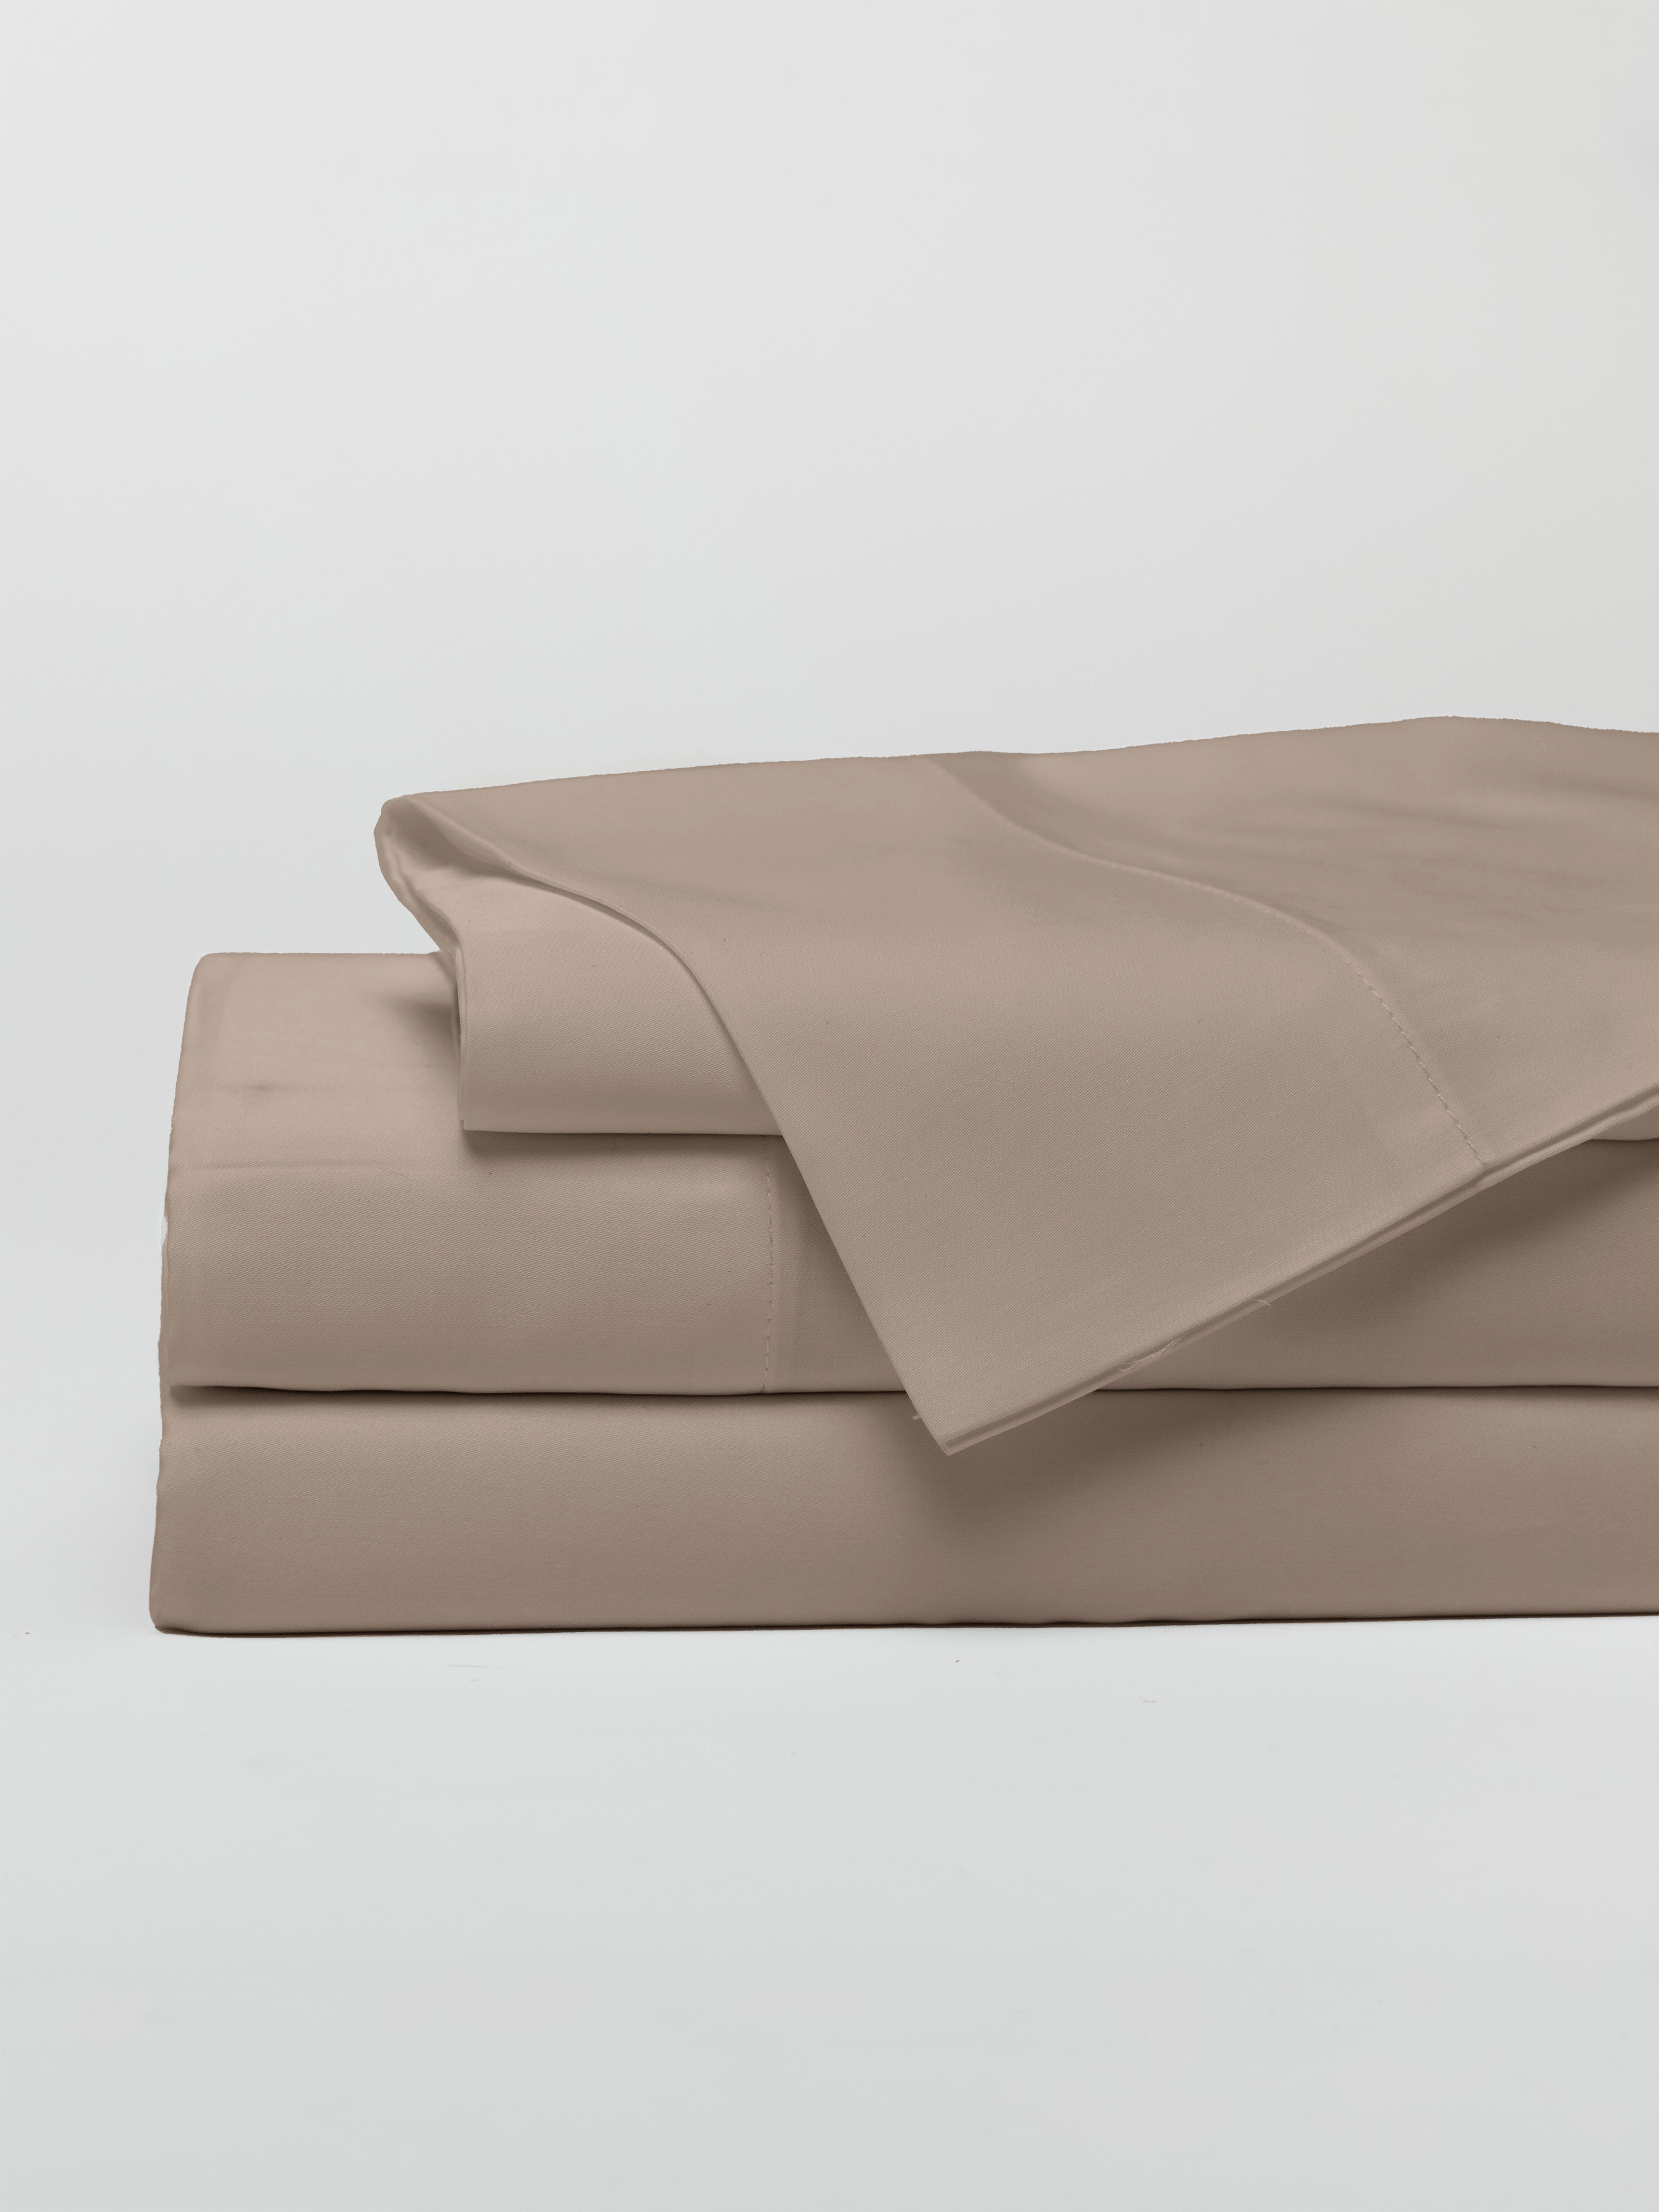 Bulk Fitted Sheets 39 X 75 X 7